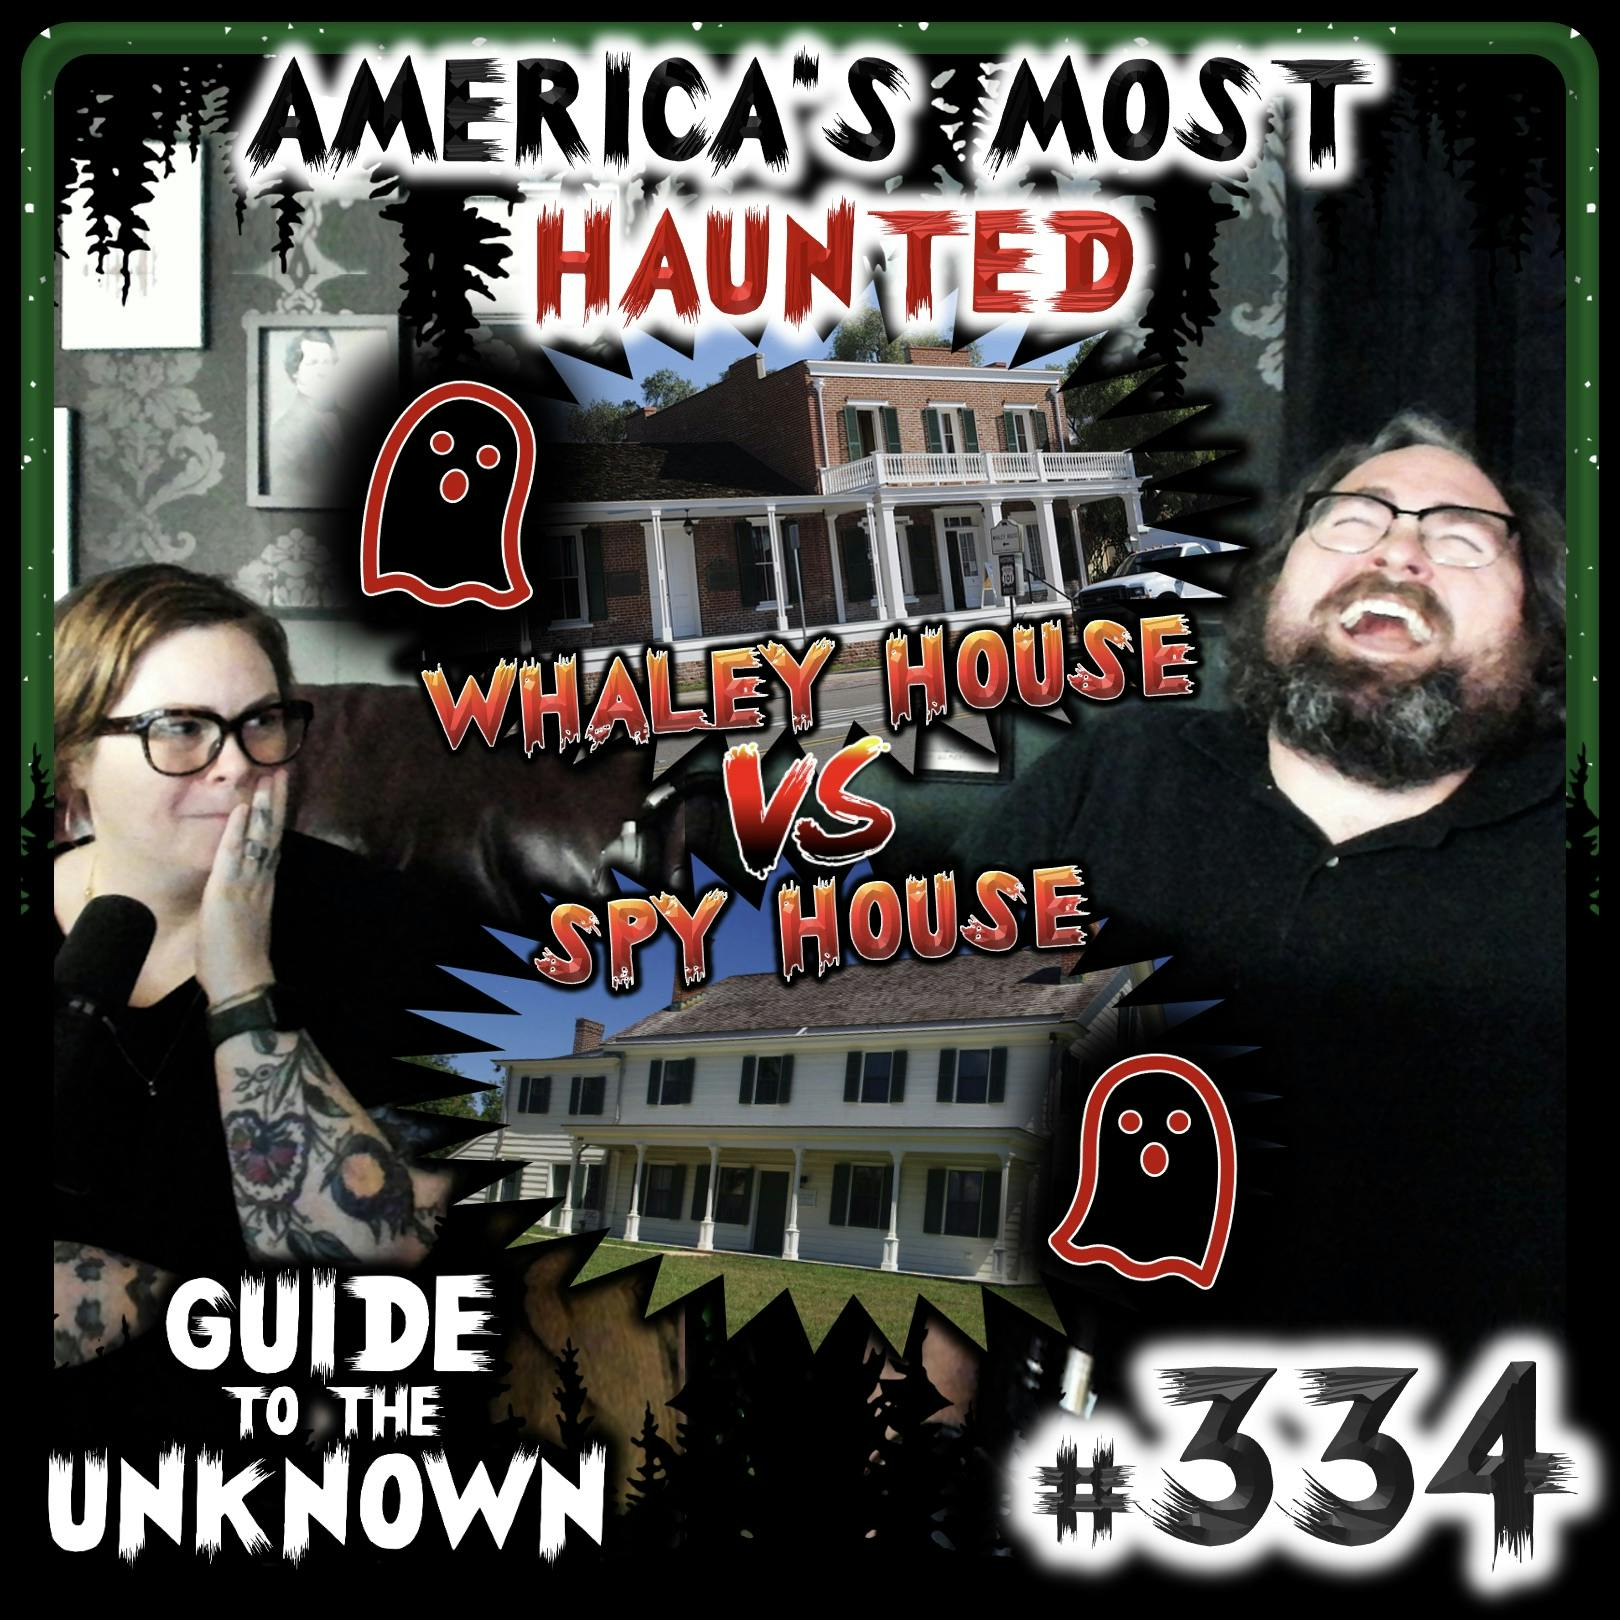 334: America’s Most Haunted - Whaley House VS. Spy House